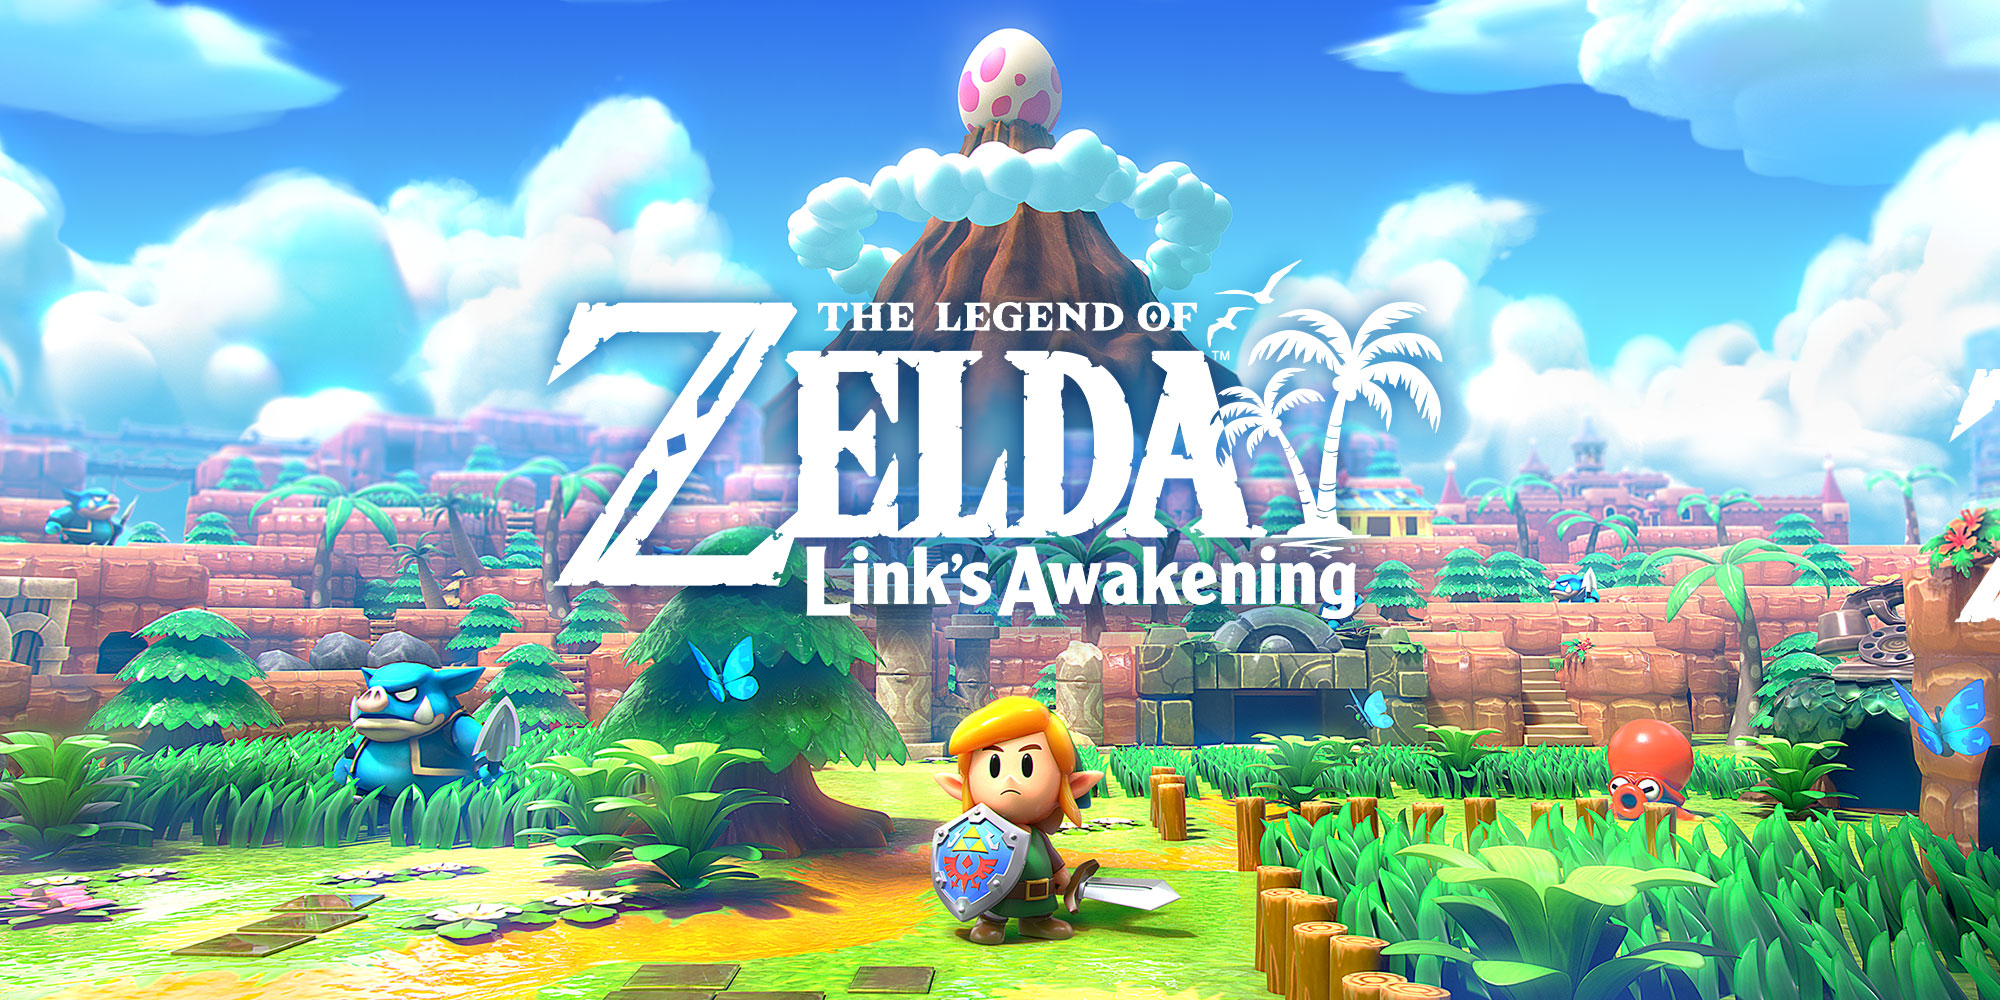 Learn more about The Legend of Zelda: Link’s Awakening from series producer Eiji Aonuma!